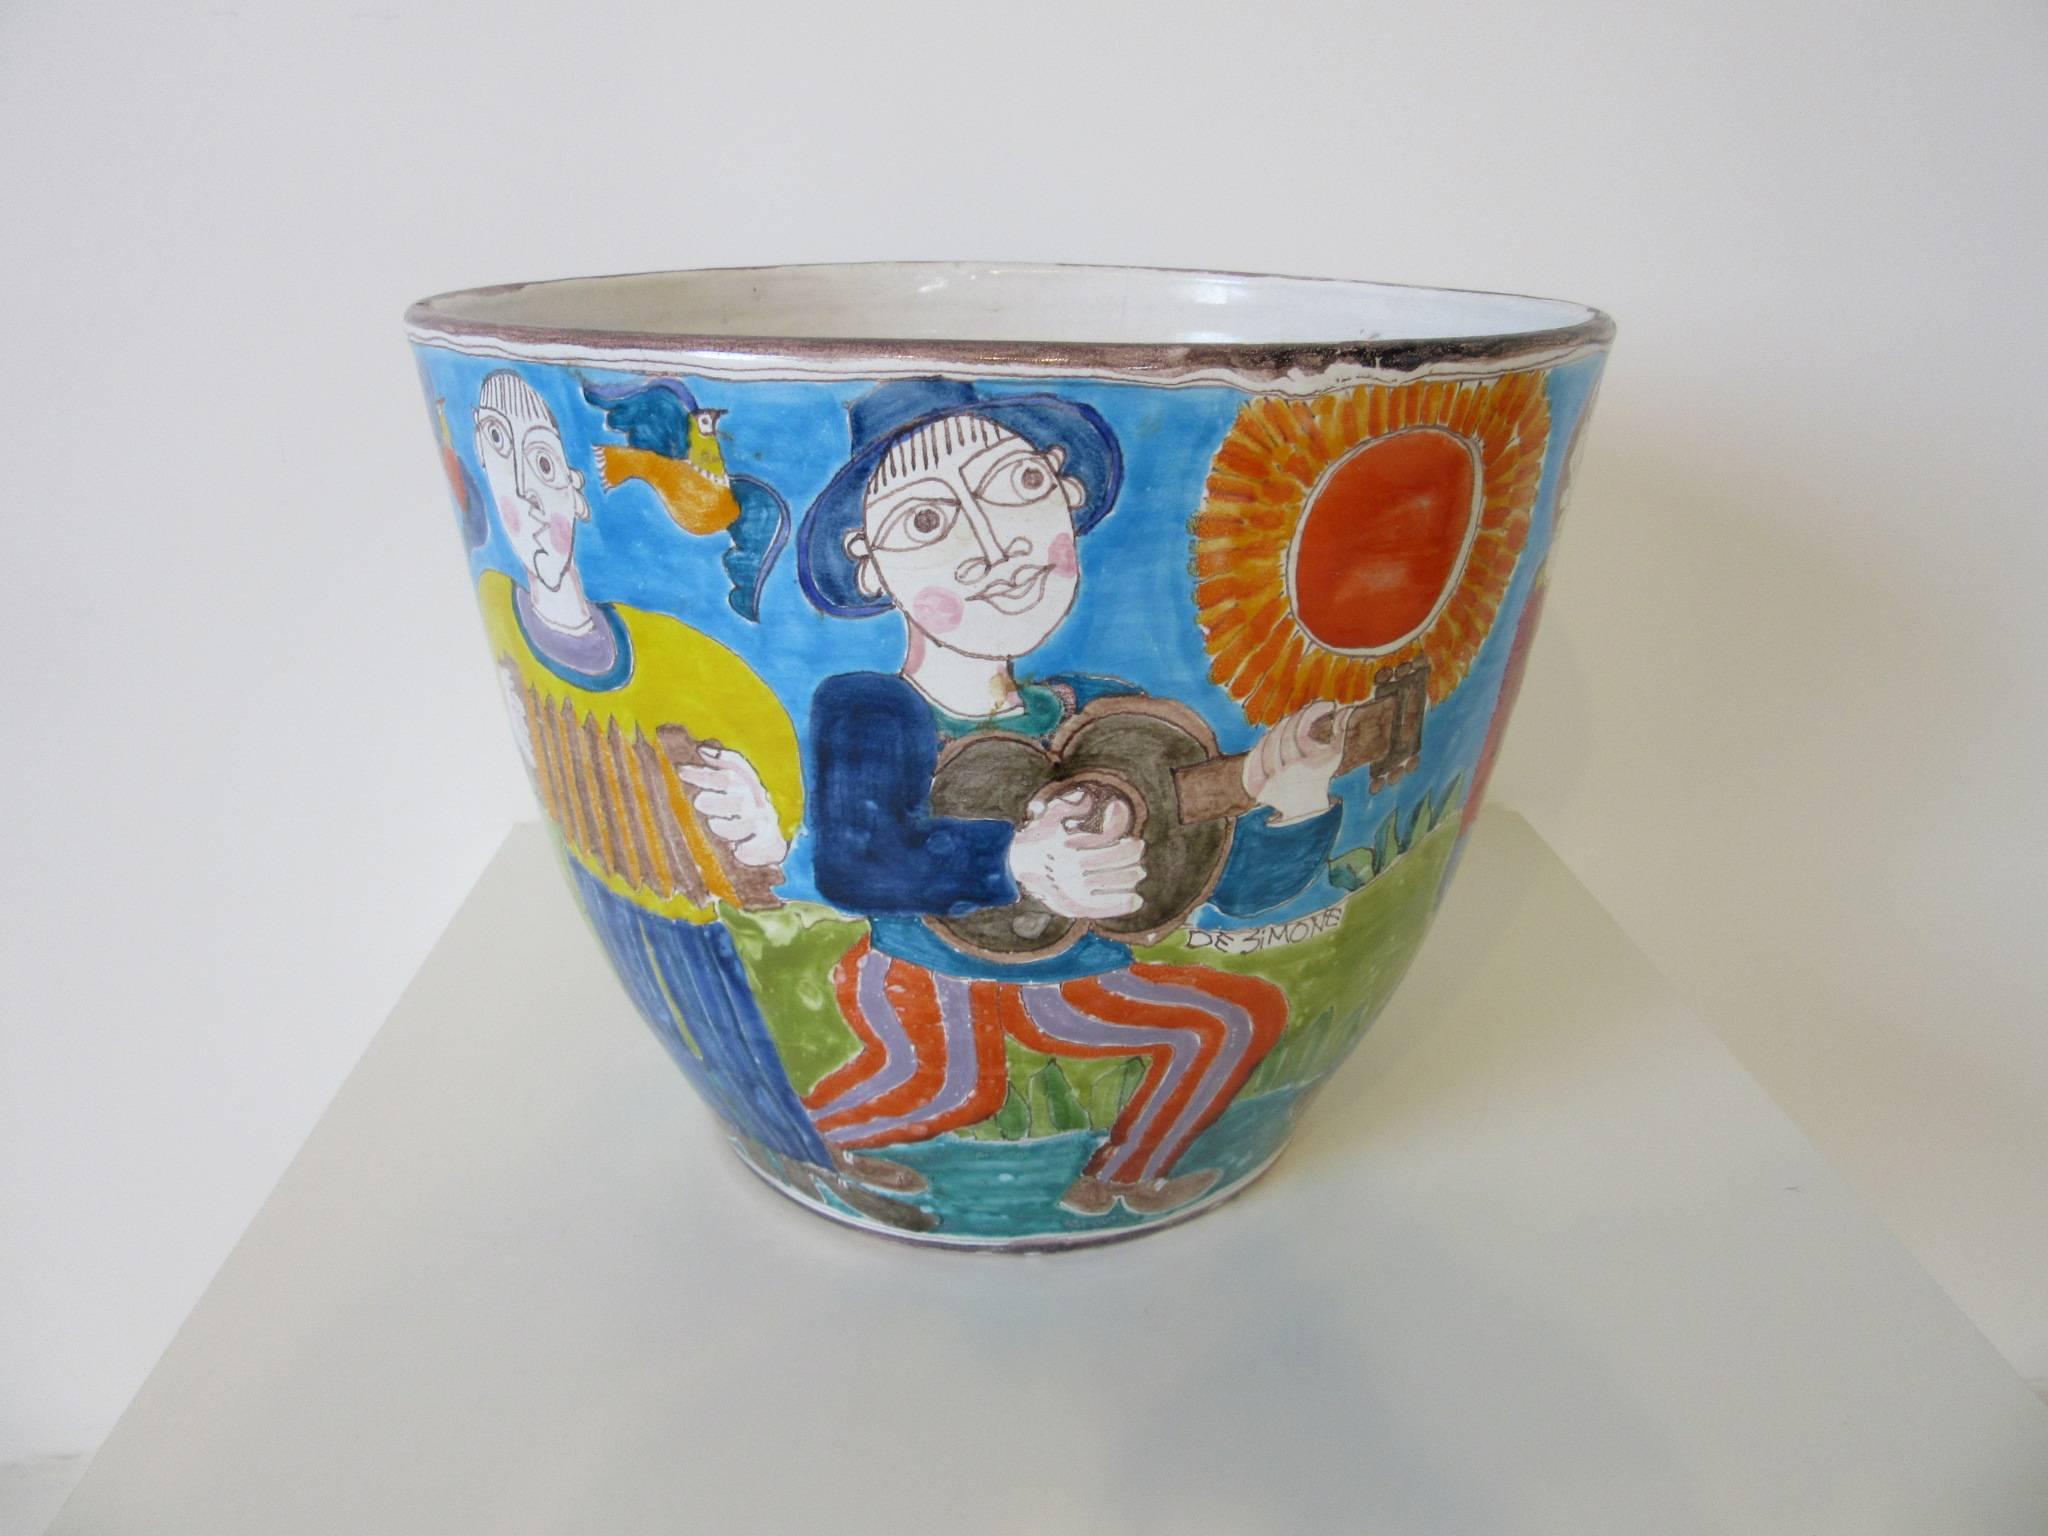 A whimsical hand-painted pot or planter with a festive musical scene with dancing and partying depicted around the entire surface. A rare very large form by this artist signed in the scene and to the bottom by DeSimone, made in Italy.